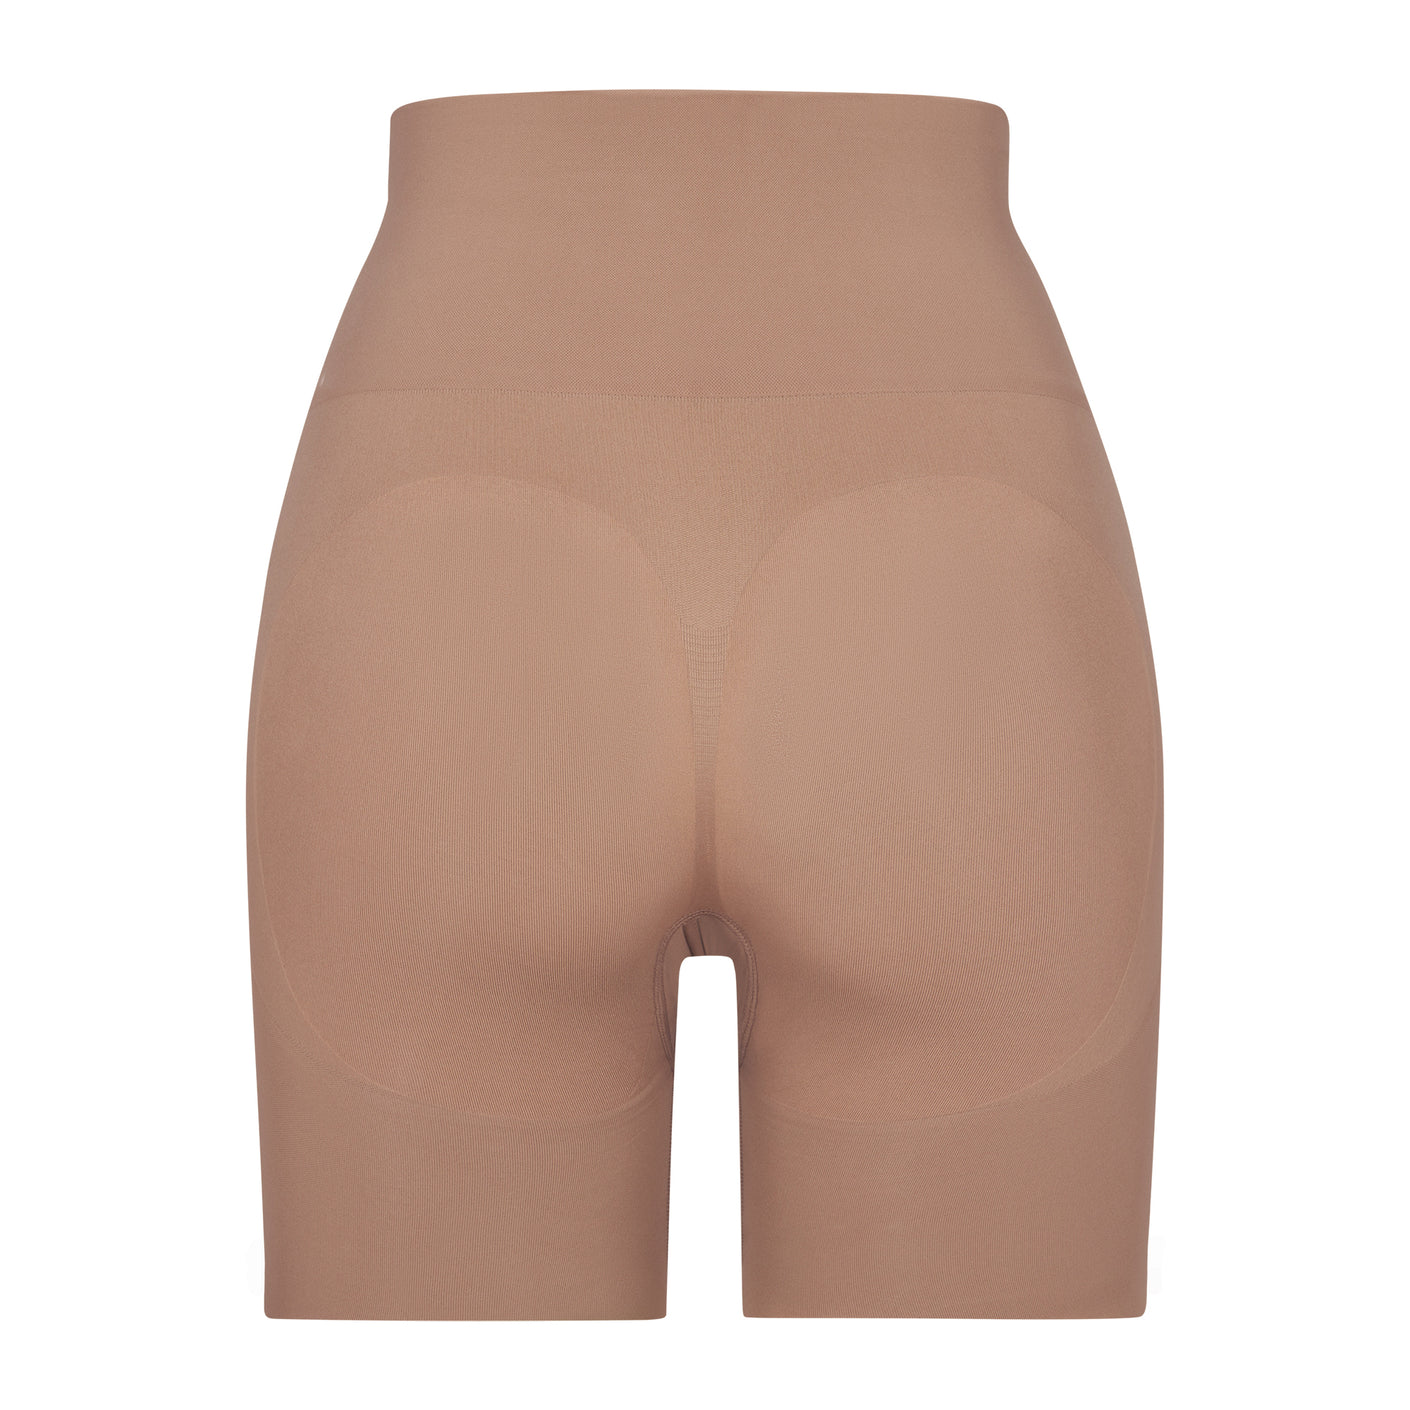 Spandex Hips and Butt Enhancer Shapewear, Shop Today. Get it Tomorrow!